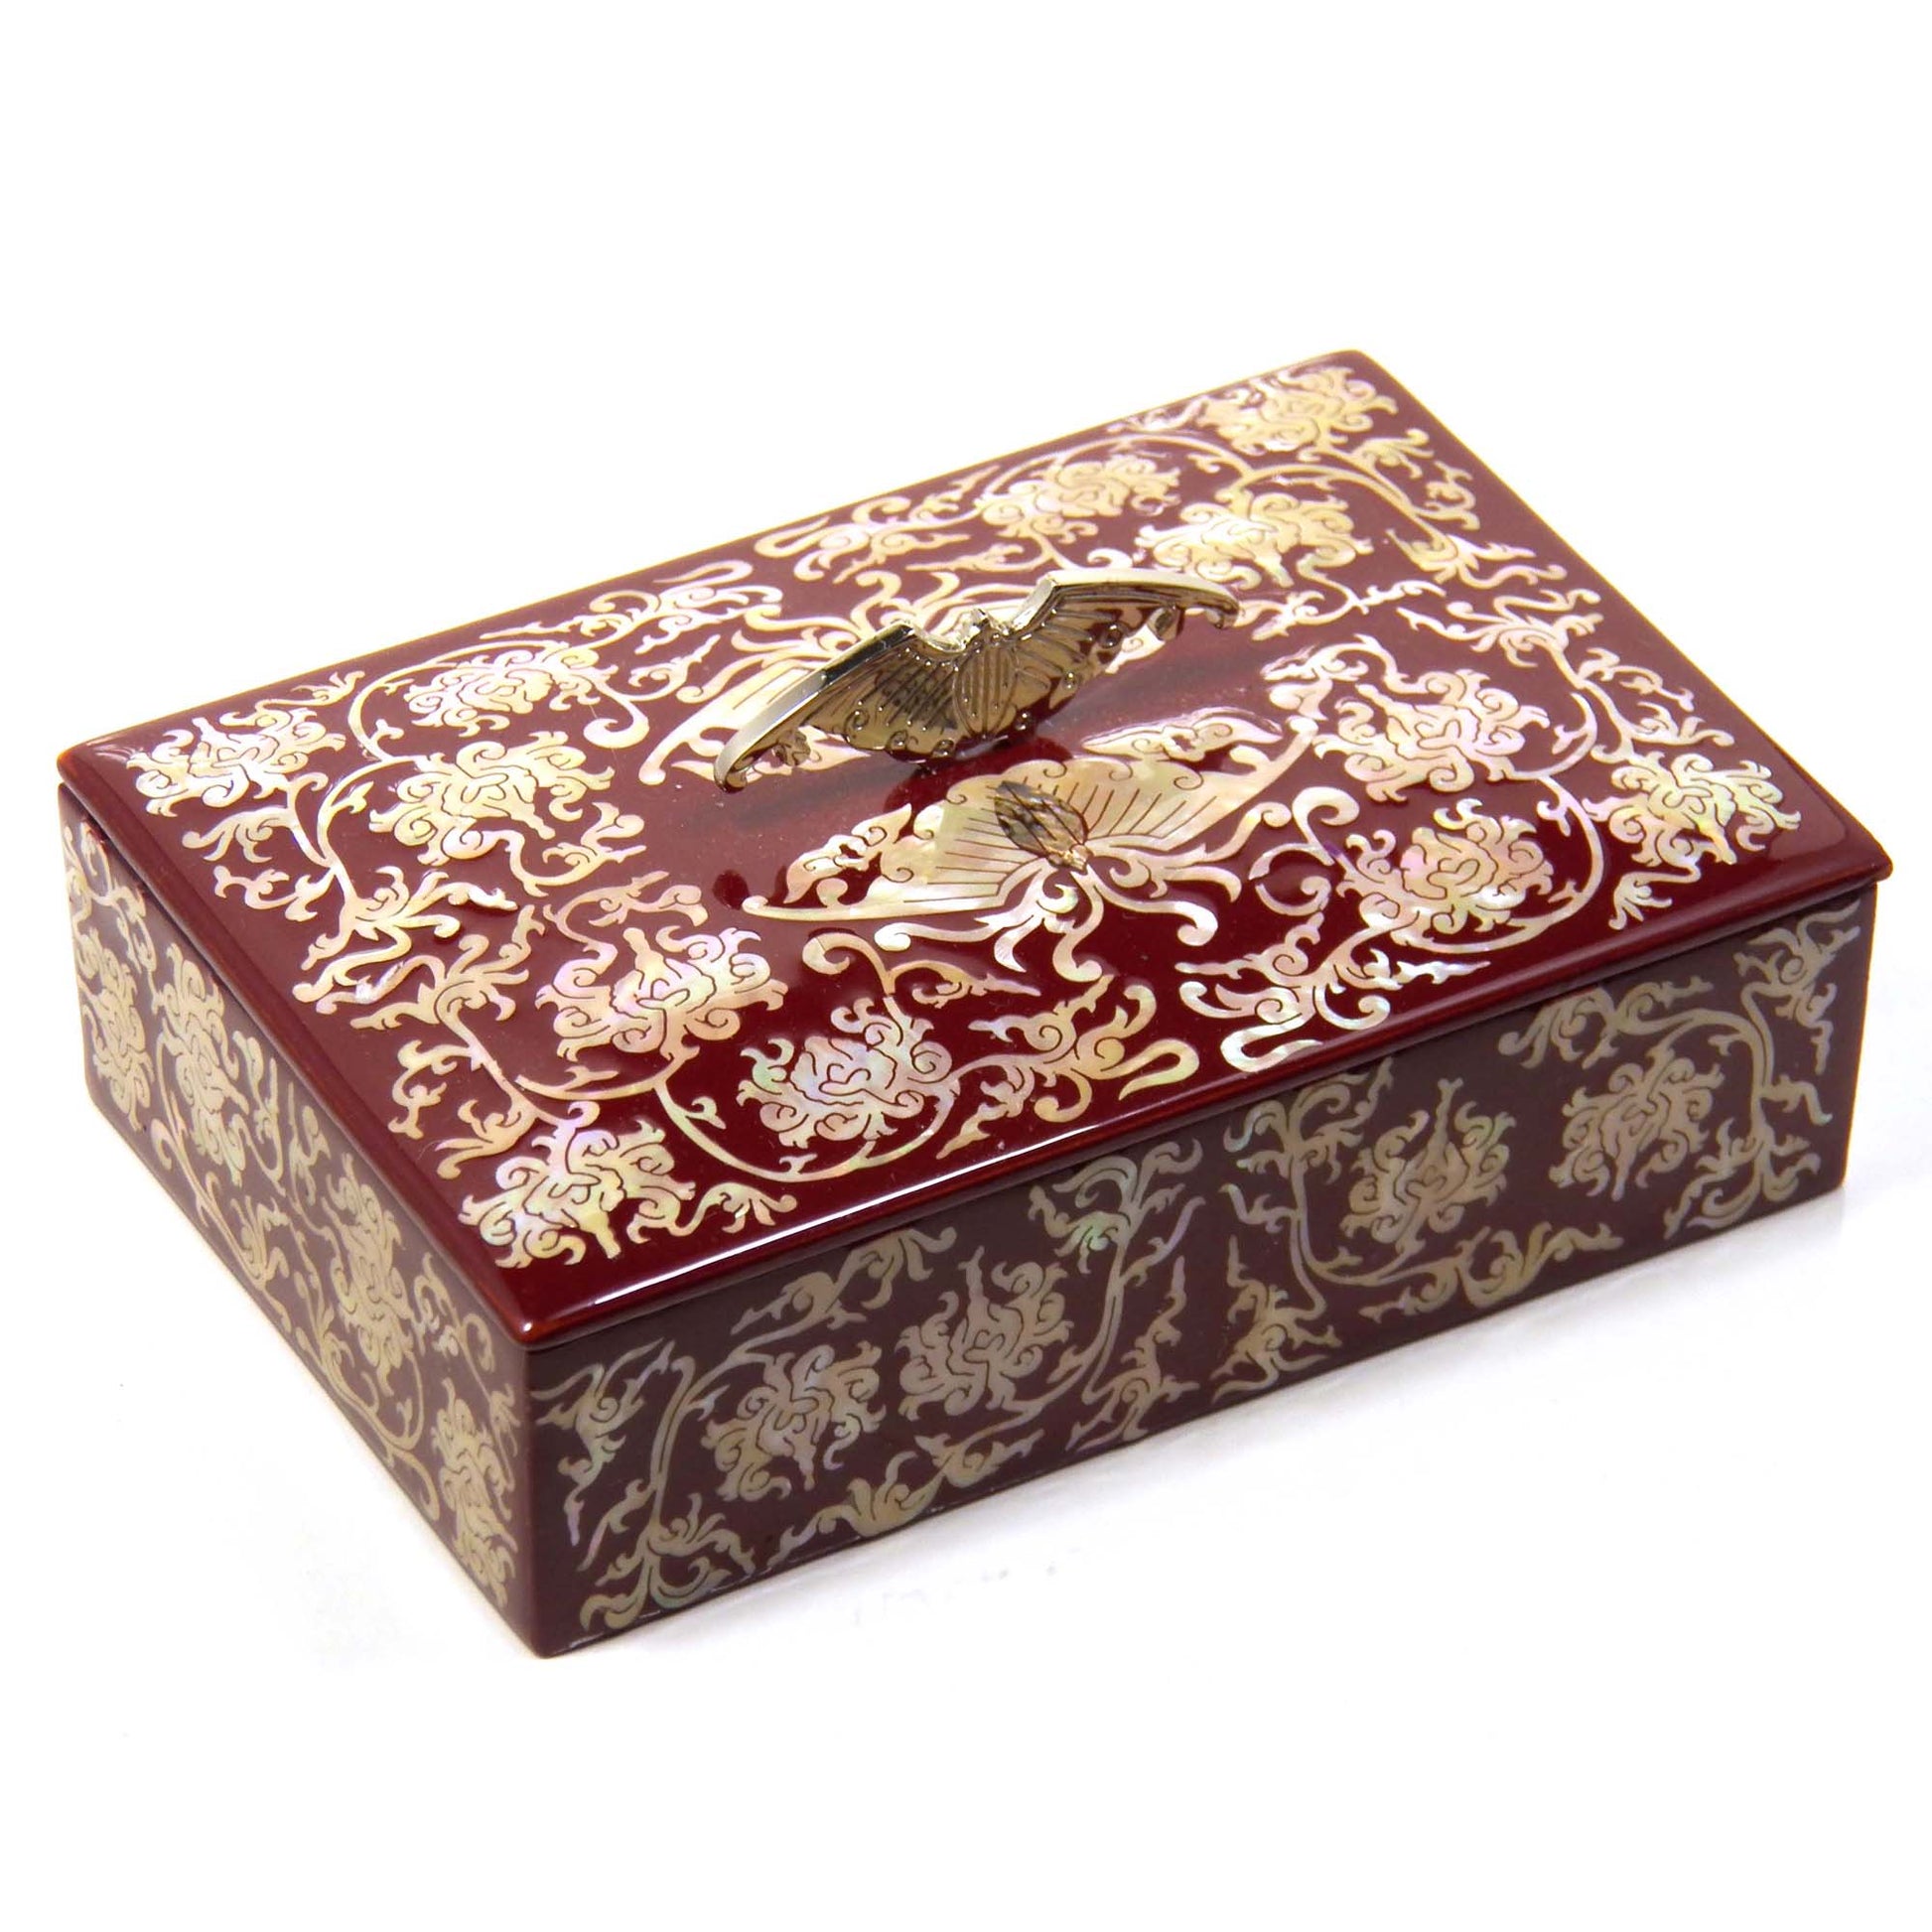 Koreian Red Lacquer Wood Trinket Box